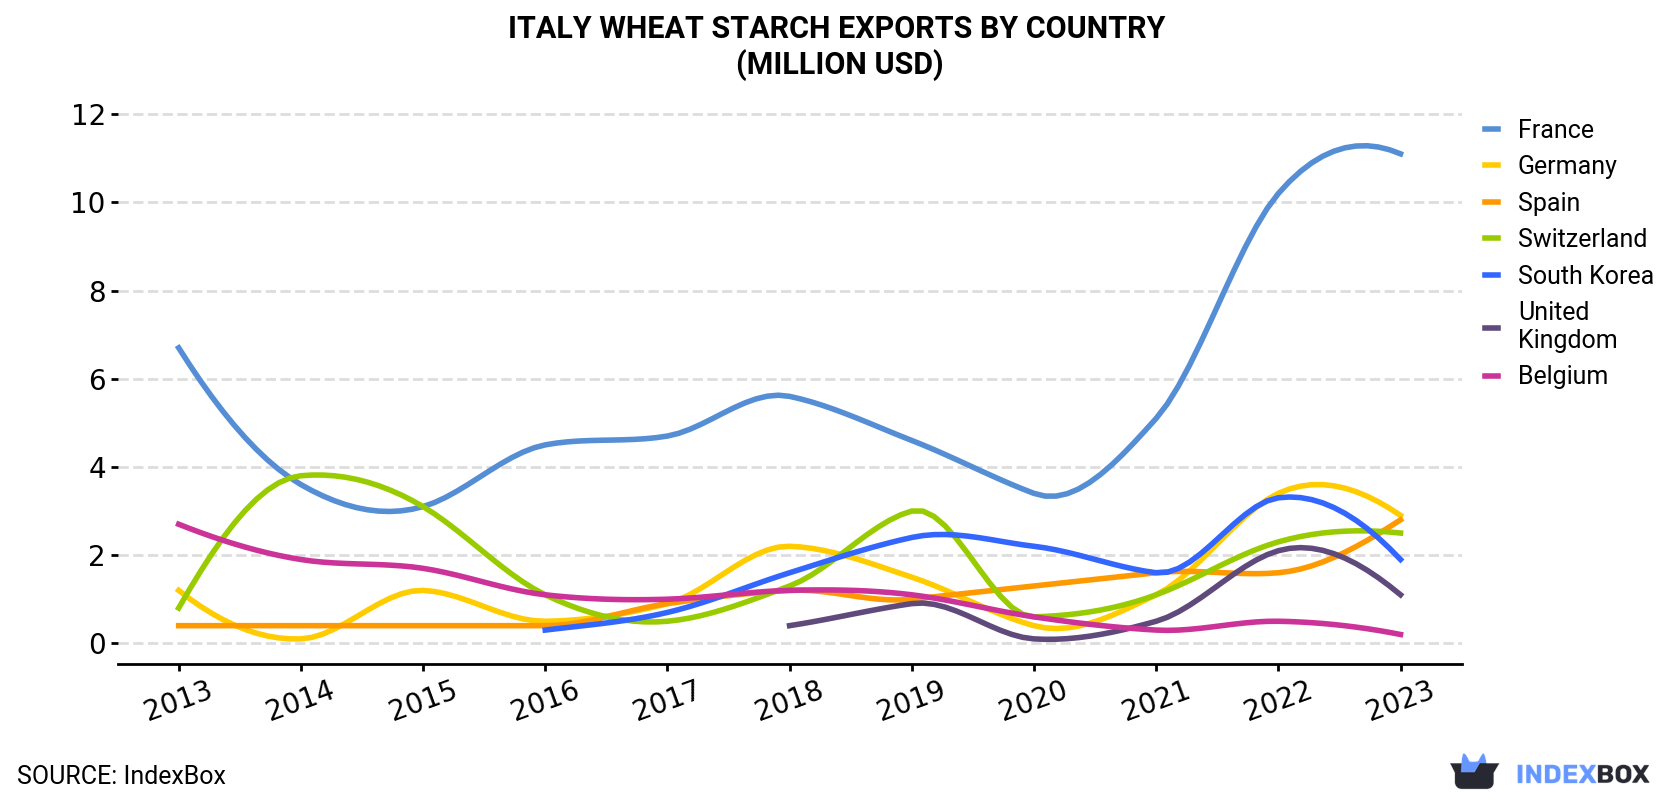 Italy Wheat Starch Exports By Country (Million USD)